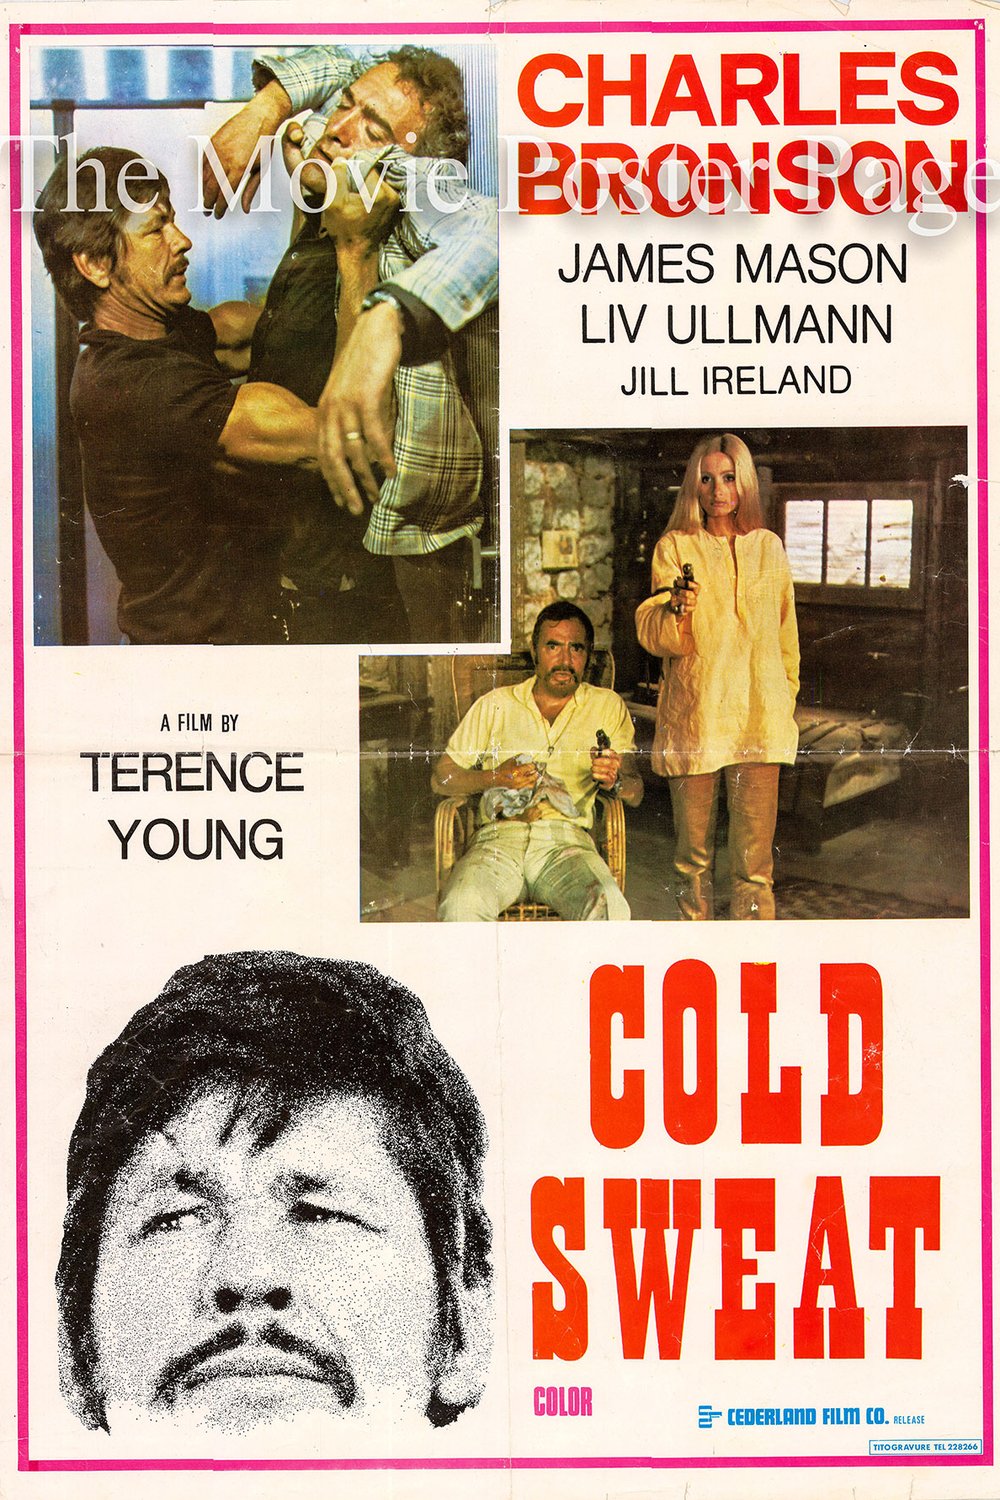 Poster of the movie Cold Sweat